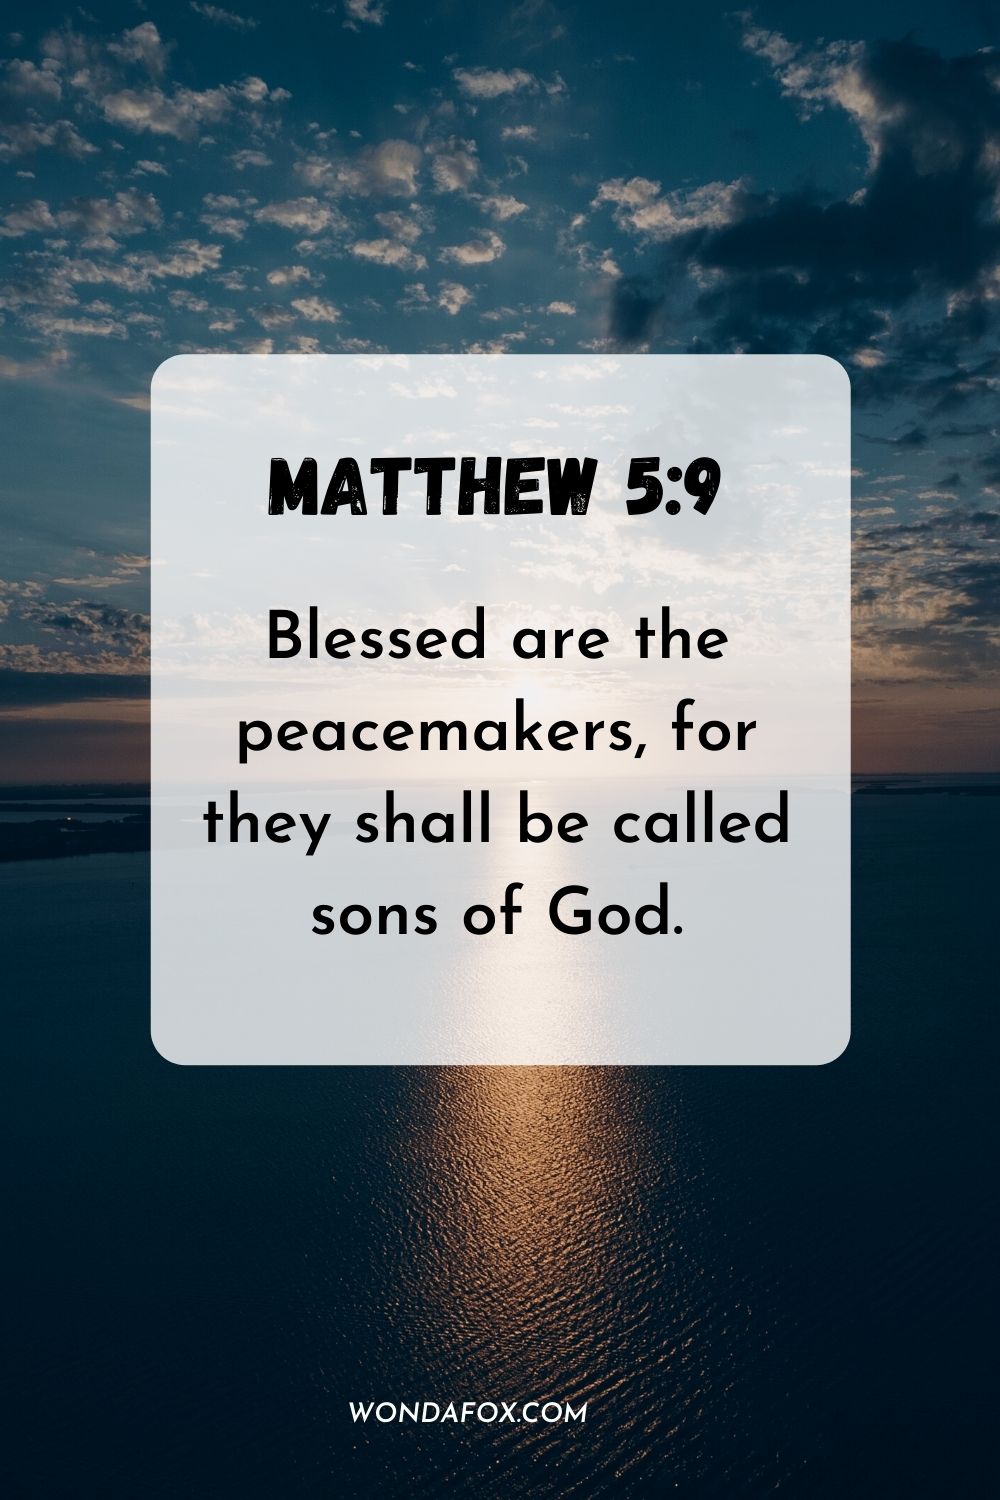 Blessed are the peacemakers, for they shall be called sons of God. Matthew 5:9